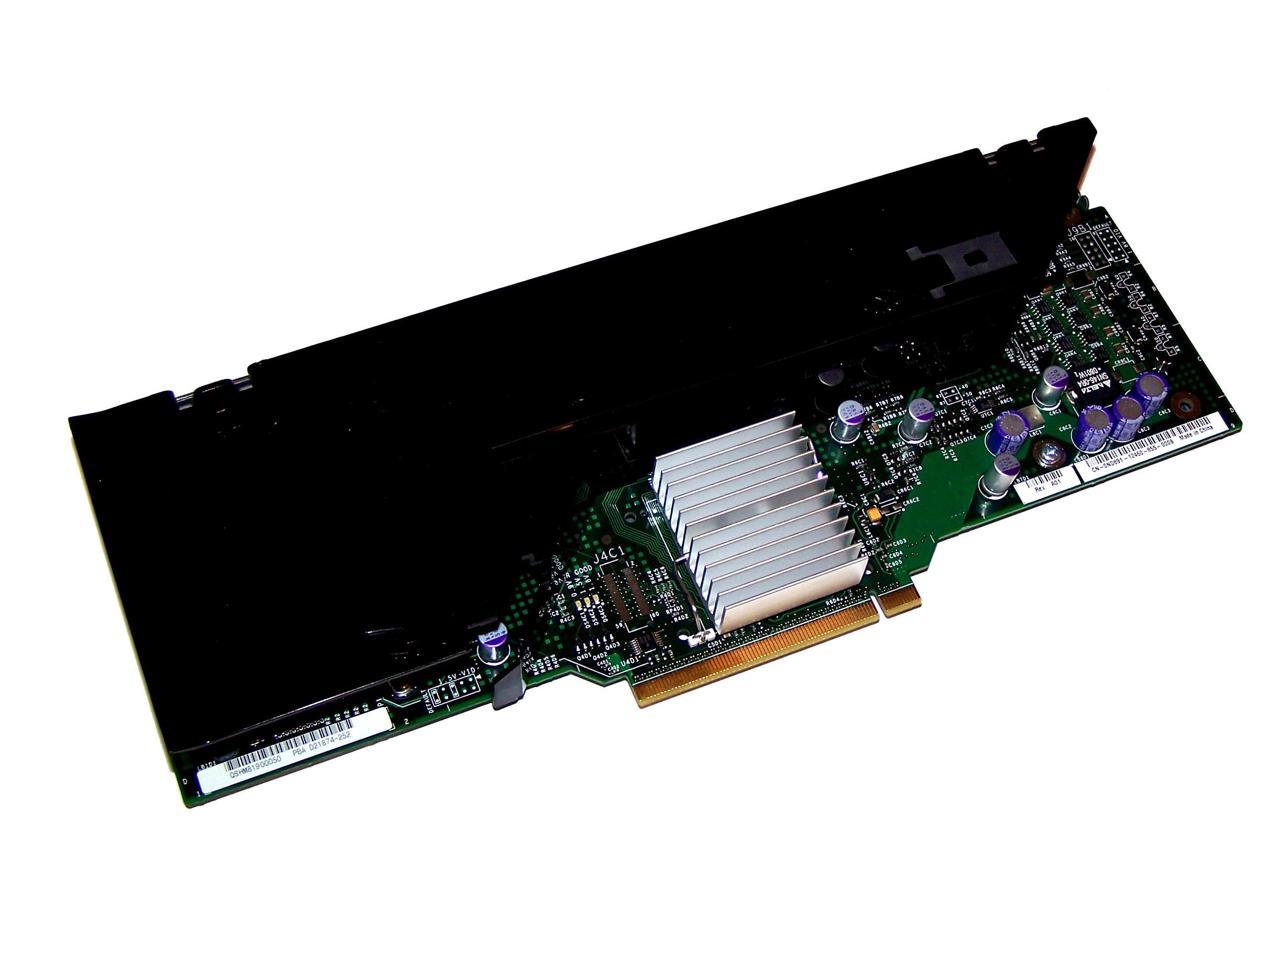 Dell Poweredge 6850 Server Memory Expansion Riser Board ND891 w/Cover 